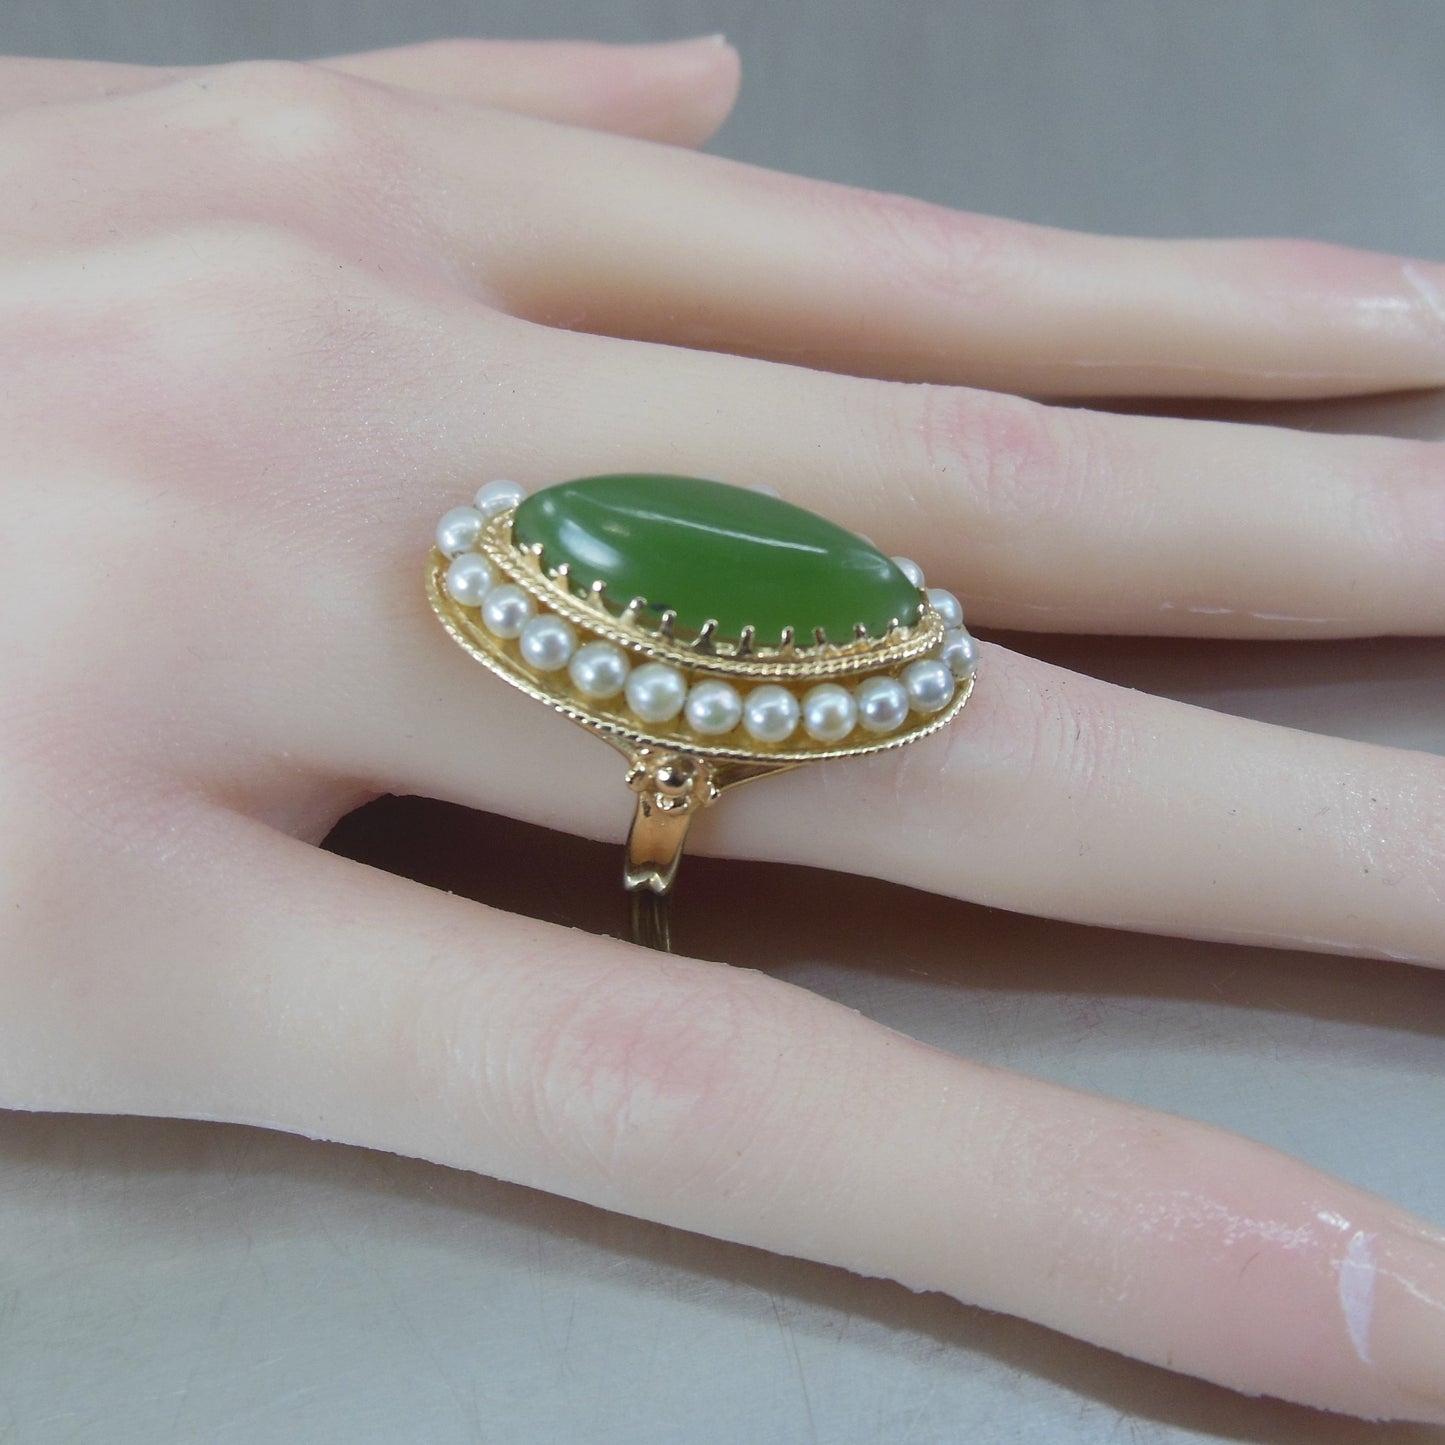 Estate Women's Ring 14K Yellow Gold Seed Pearl & Jade Size 6.25